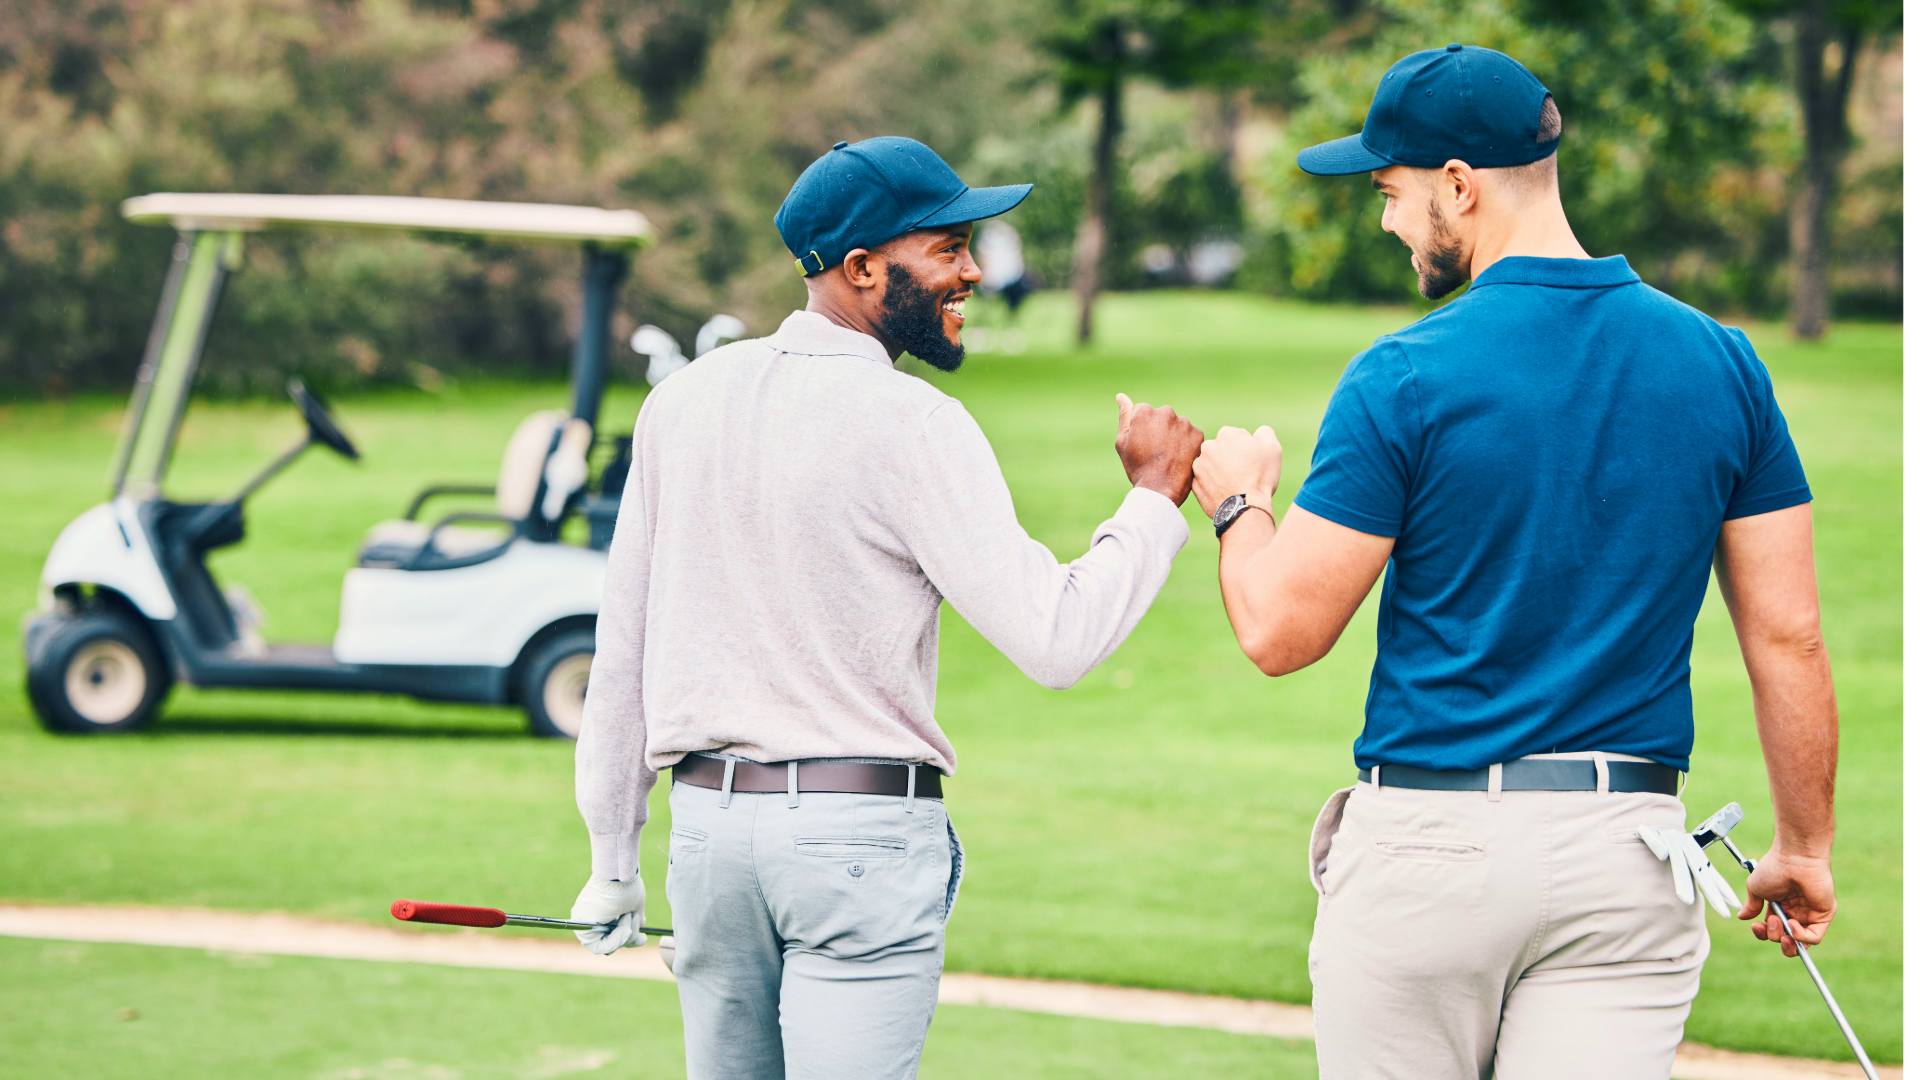 Two golfers fist bumping